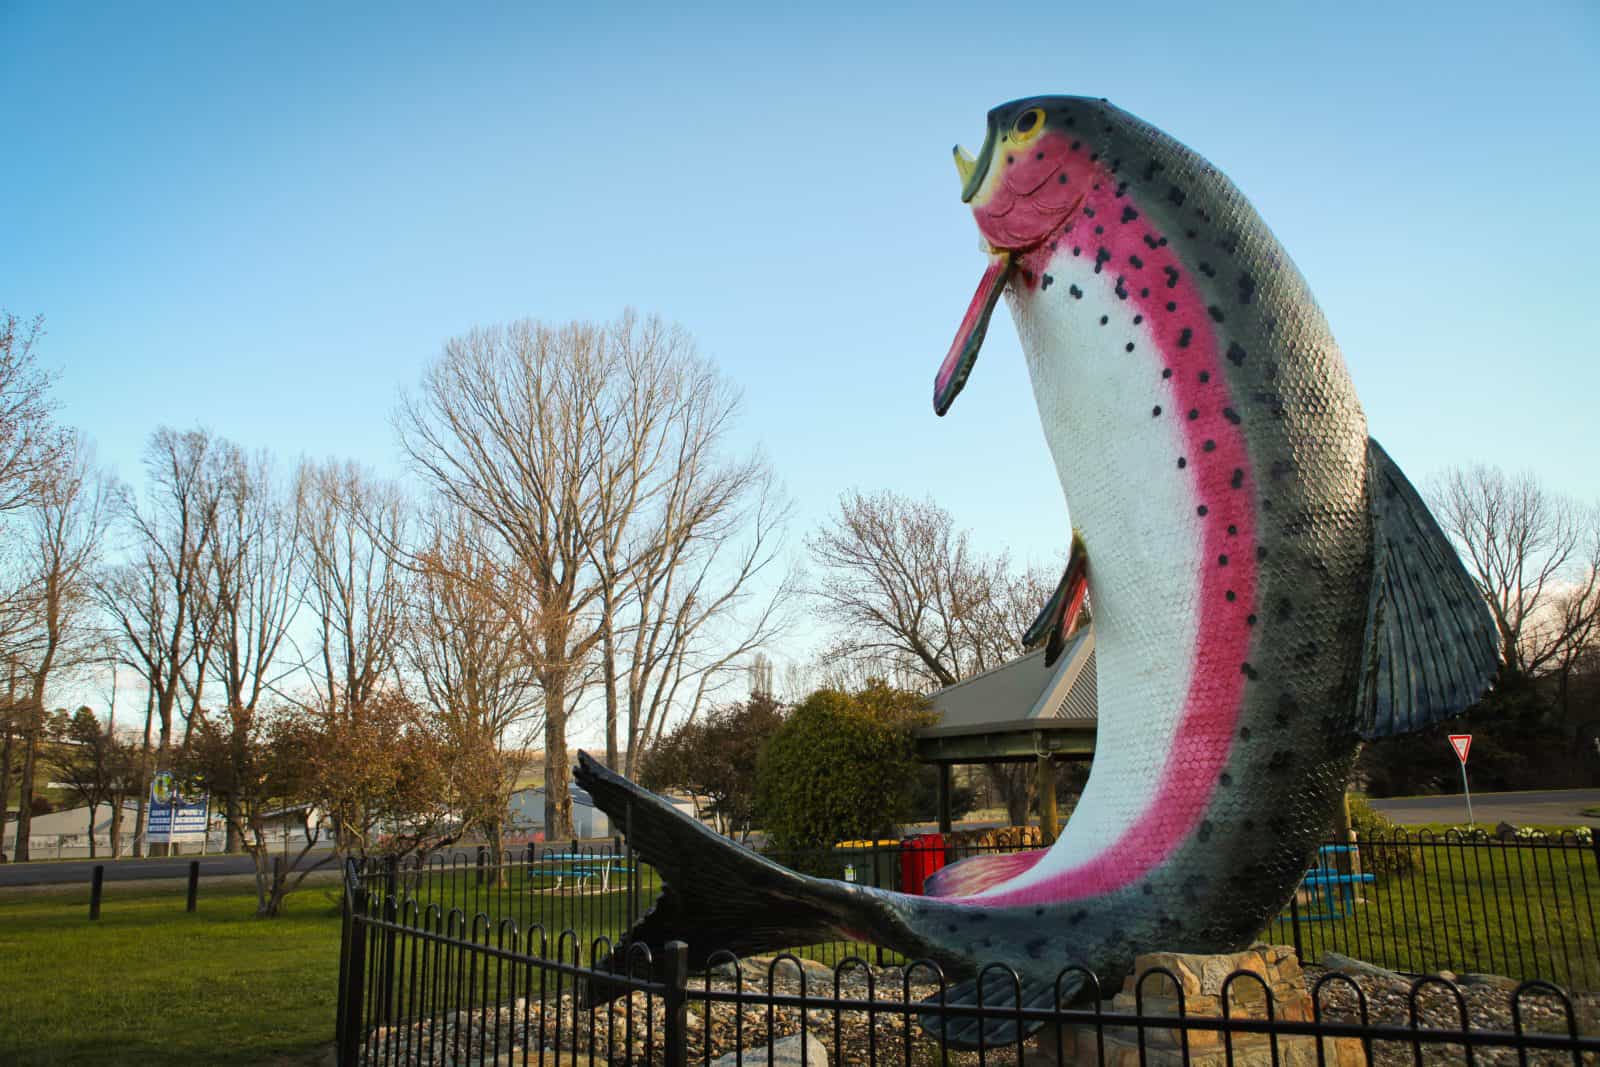 The Big Trout - Adaminaby